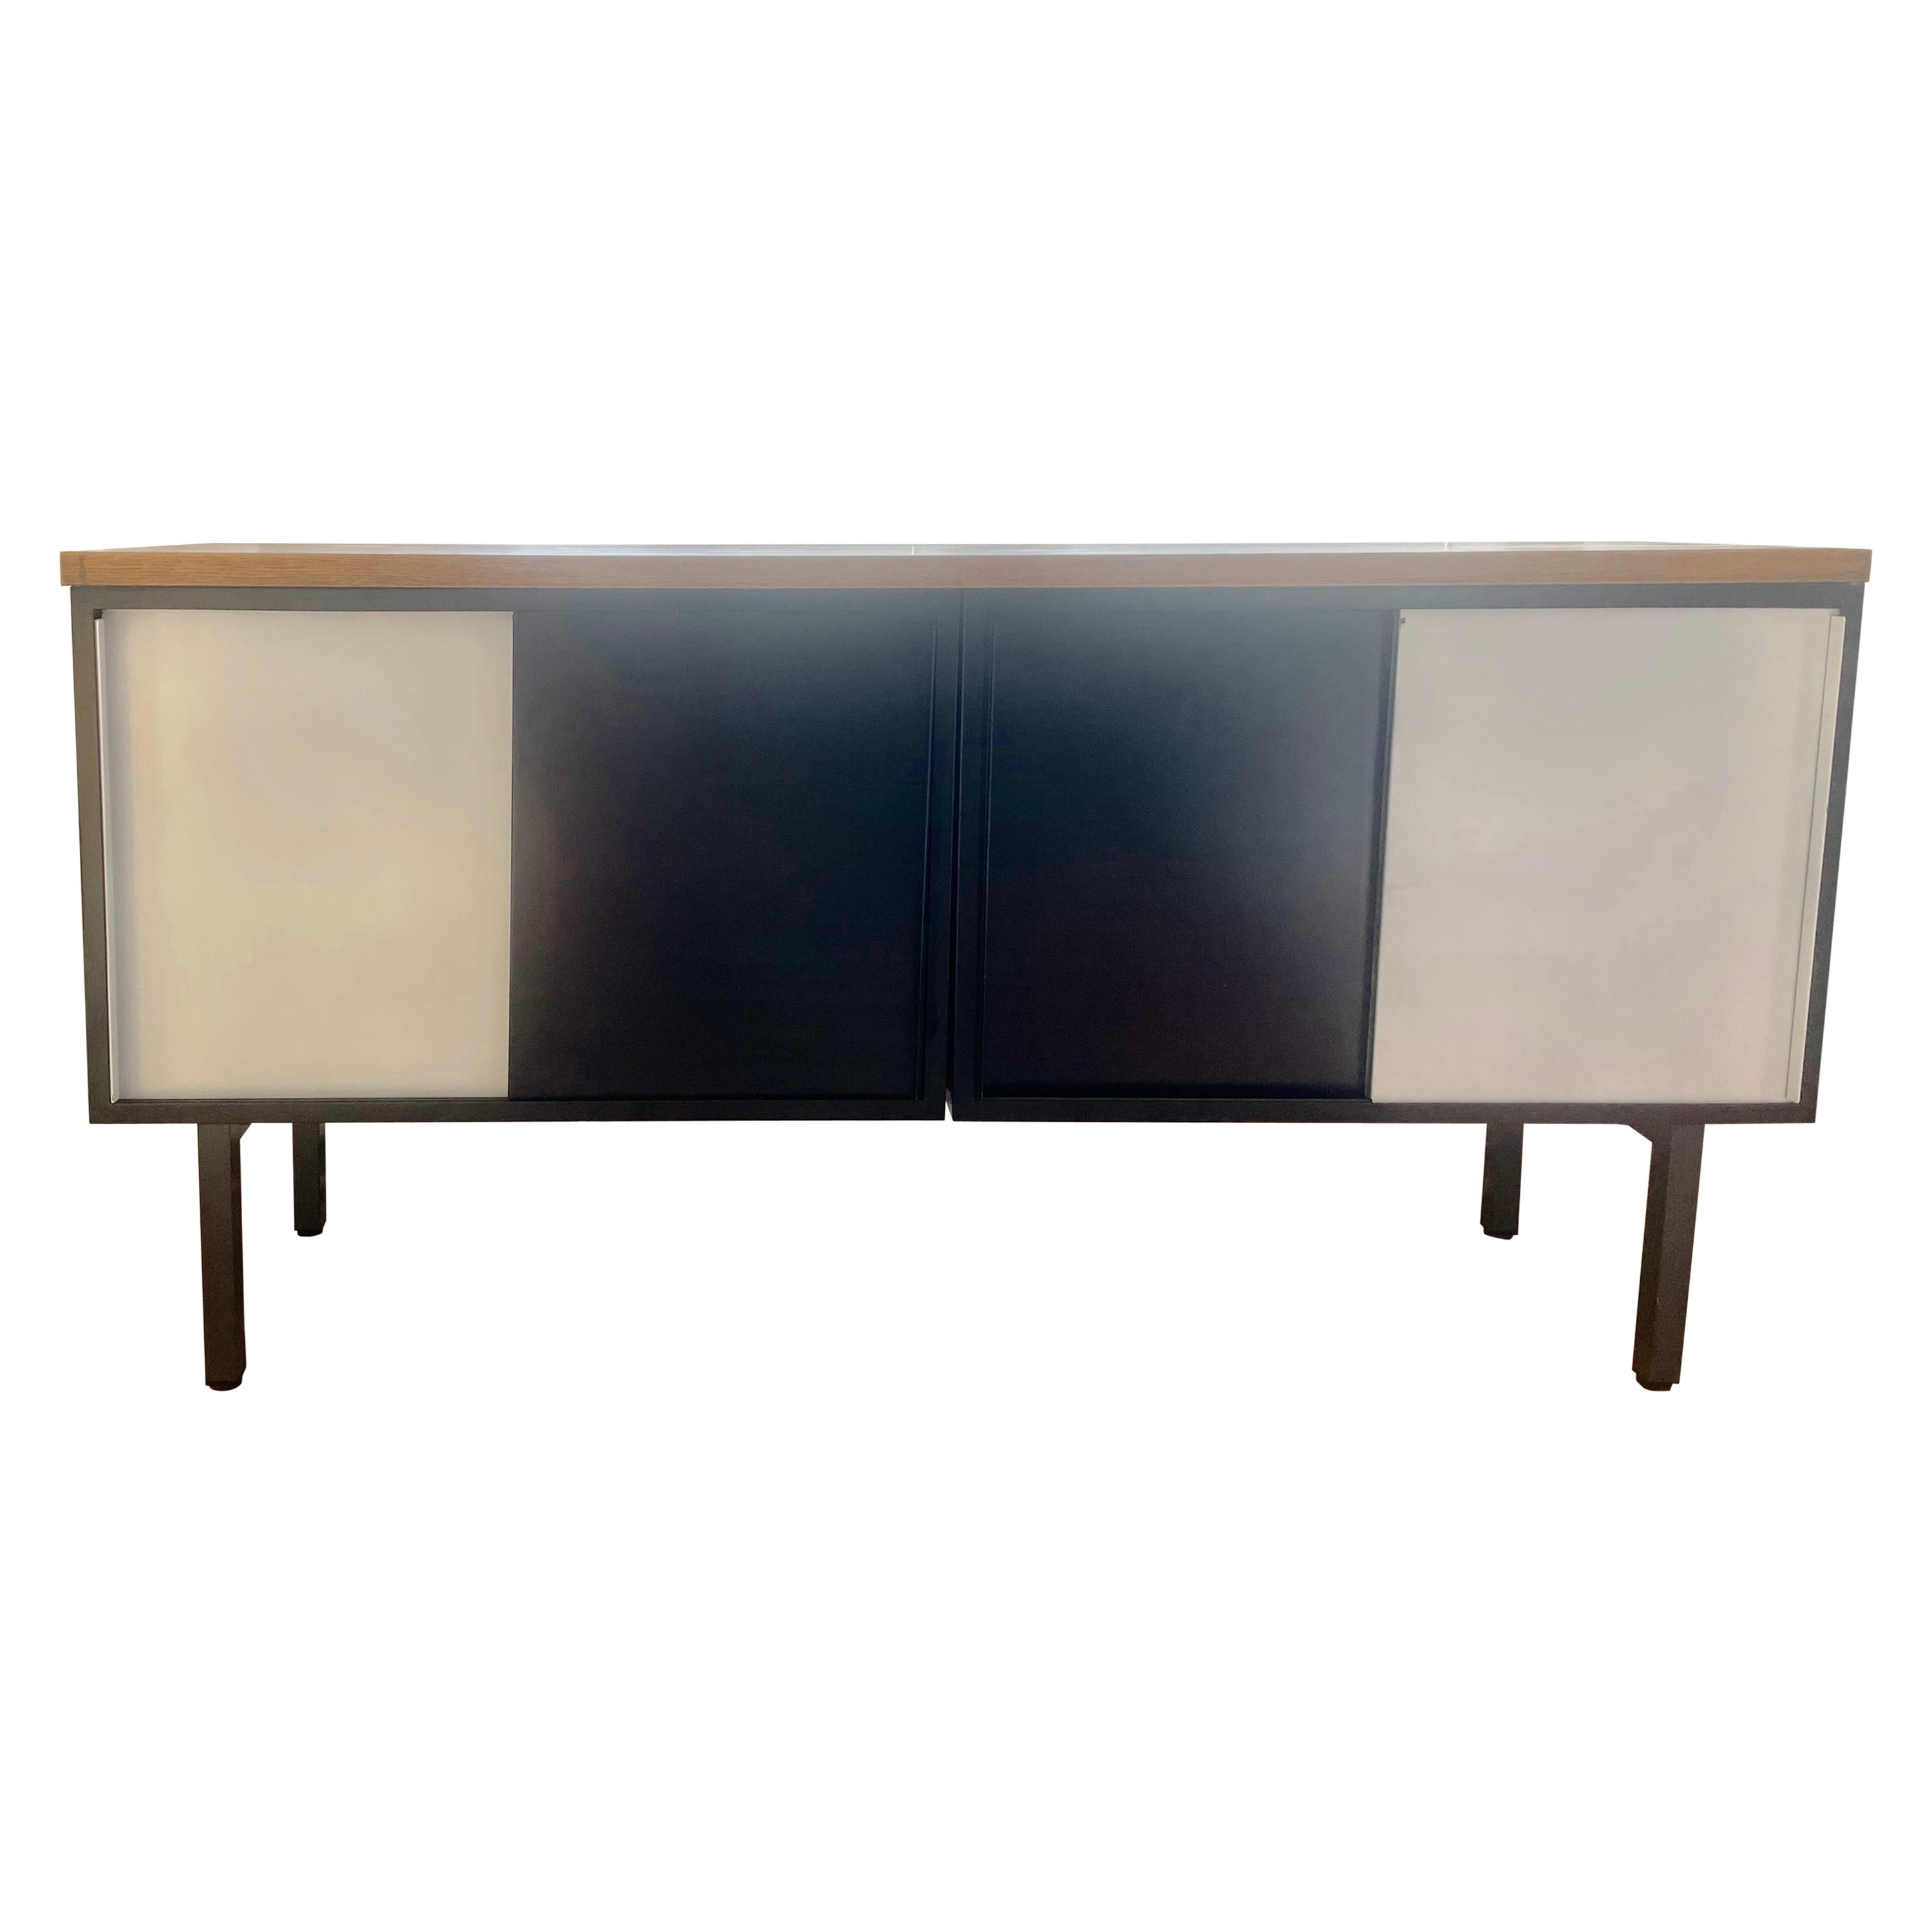 Black and White Metal and Wood Top Four Doors Sideboard by Pastoe, Netherlands.